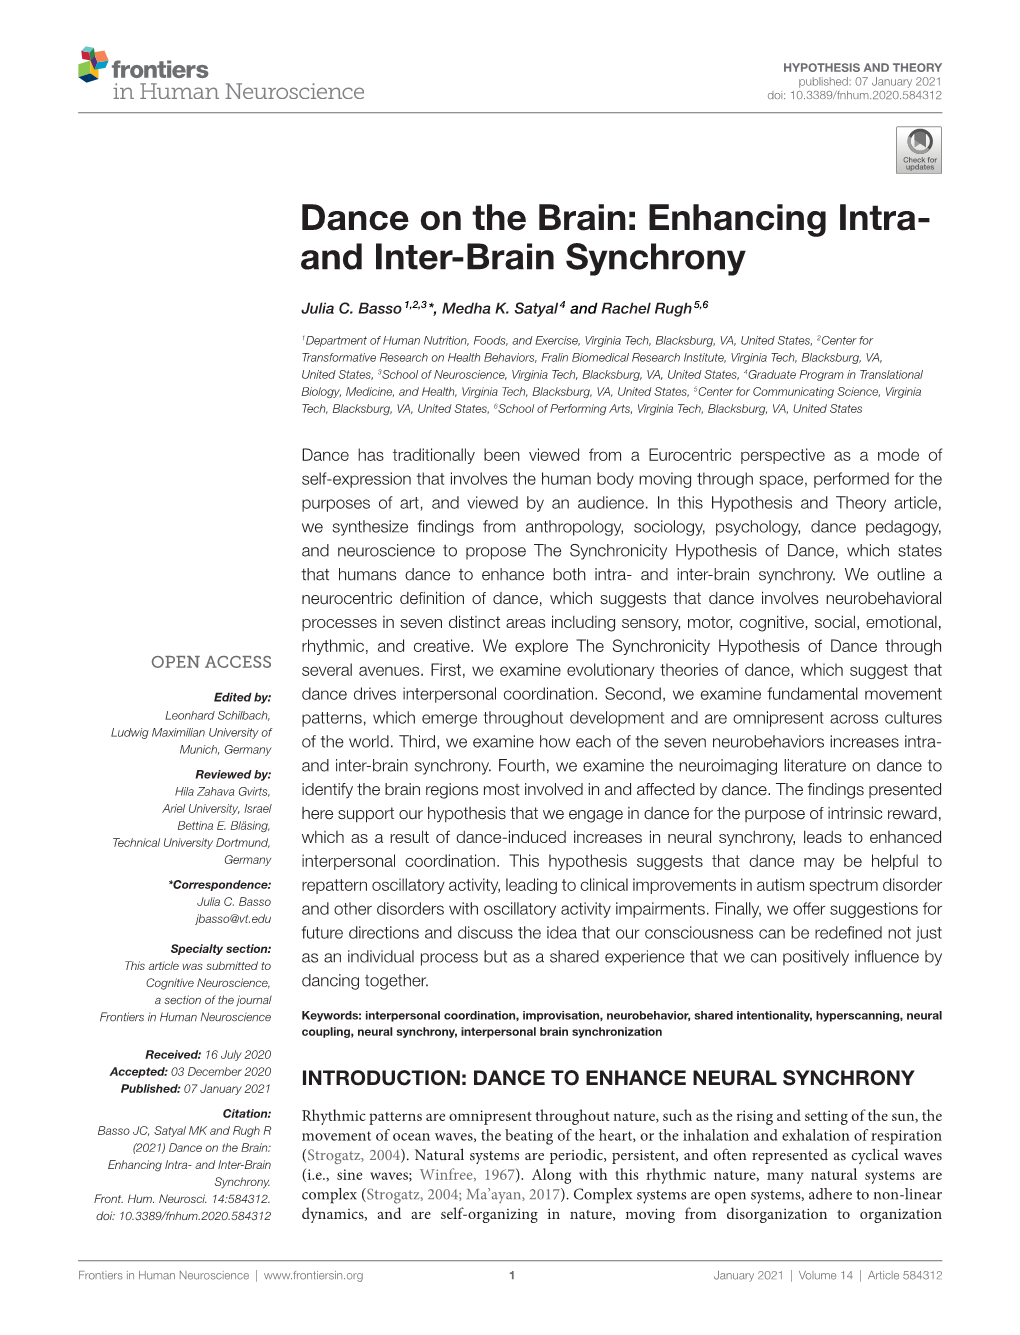 Dance on the Brain: Enhancing Intra- and Inter-Brain Synchrony